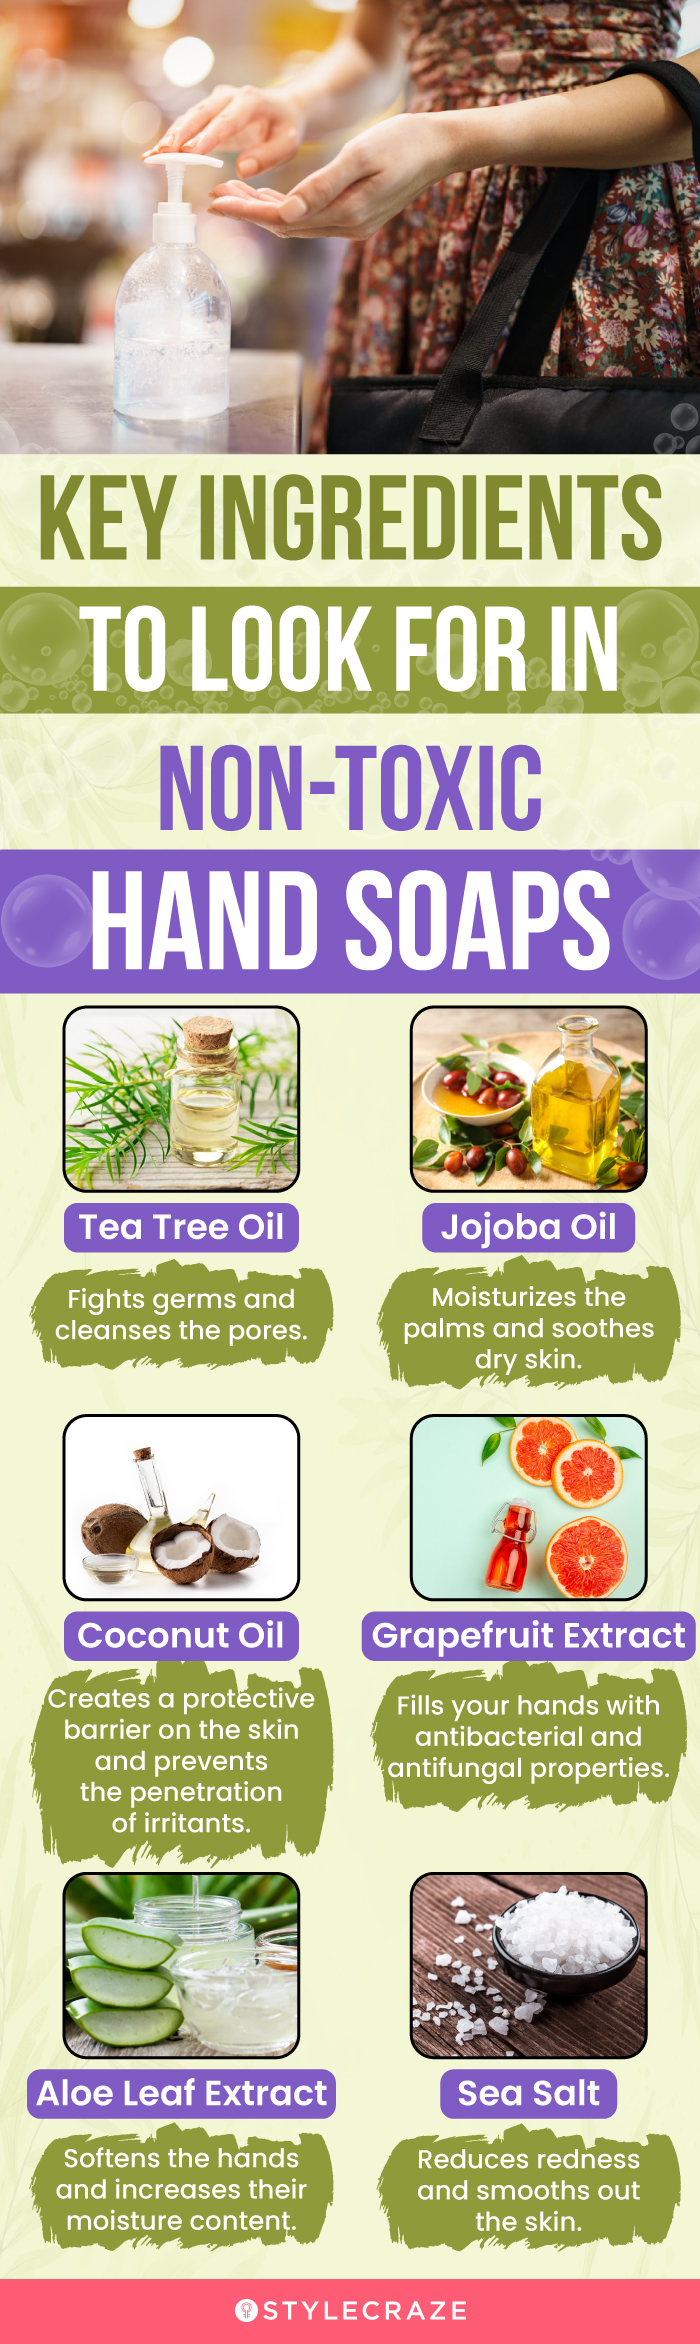 Key Ingredients To Look For In Non-Toxic Hand Soaps(infographic)